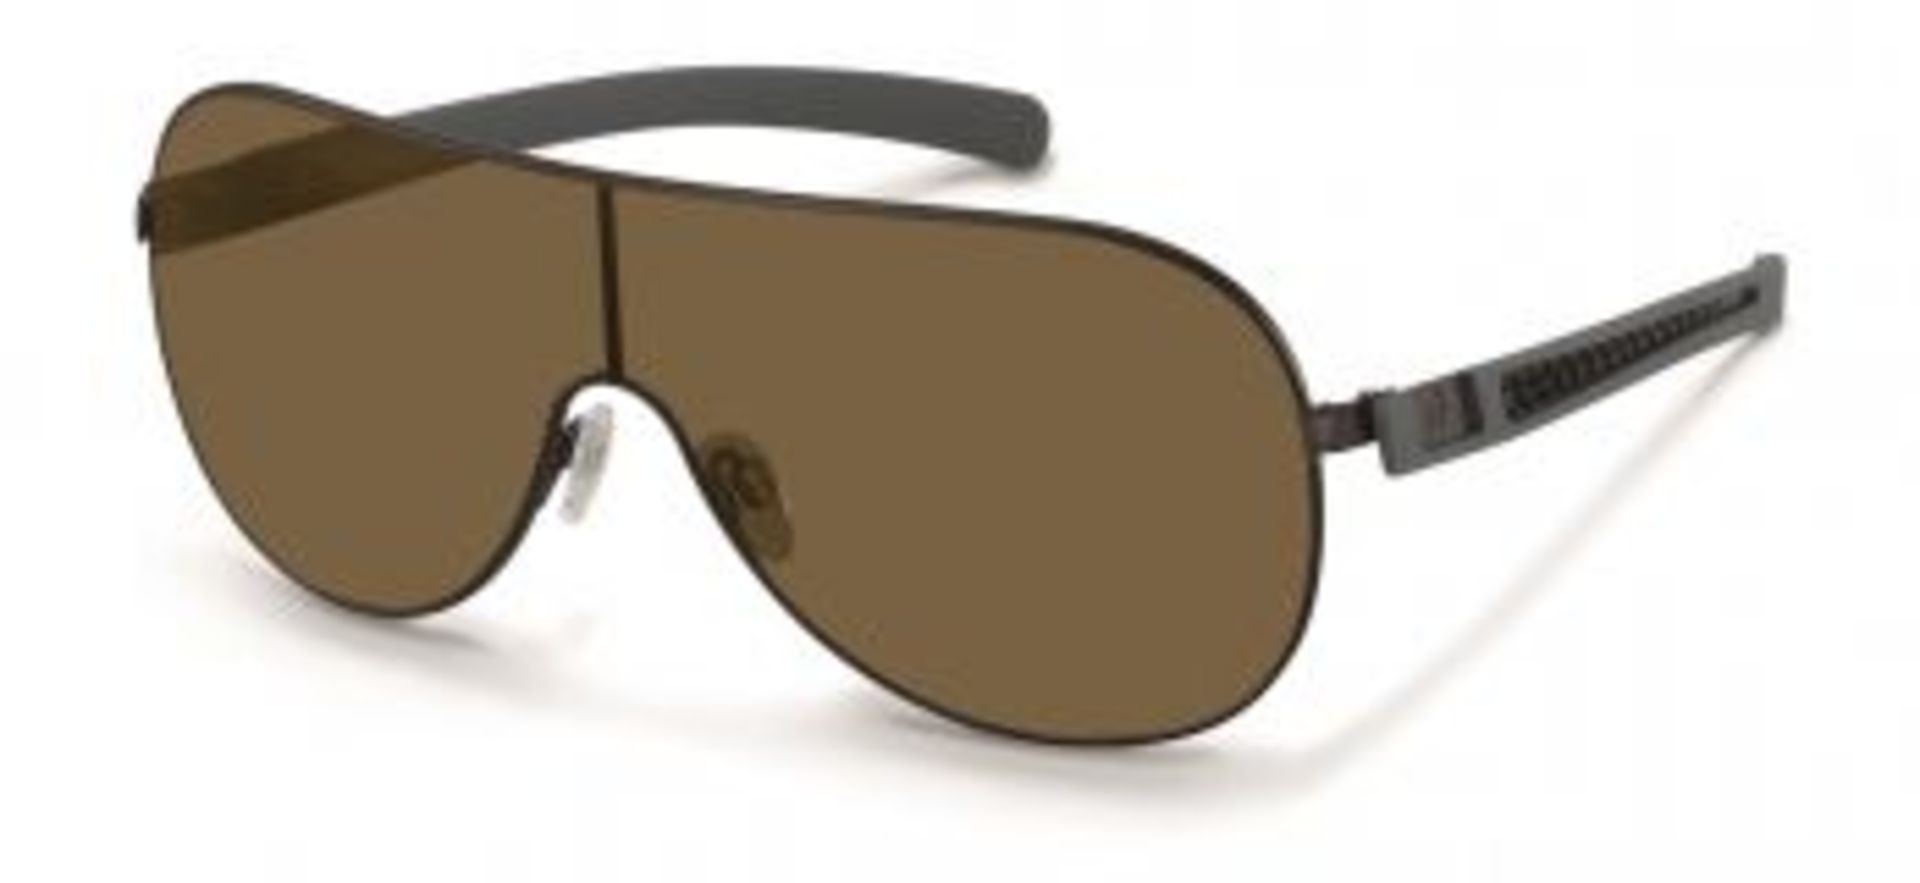 Brand New Pair Of Mens Dunhill Sunglasses - Dark Grey Metal Frame With Brown Lens RRP: £165.00